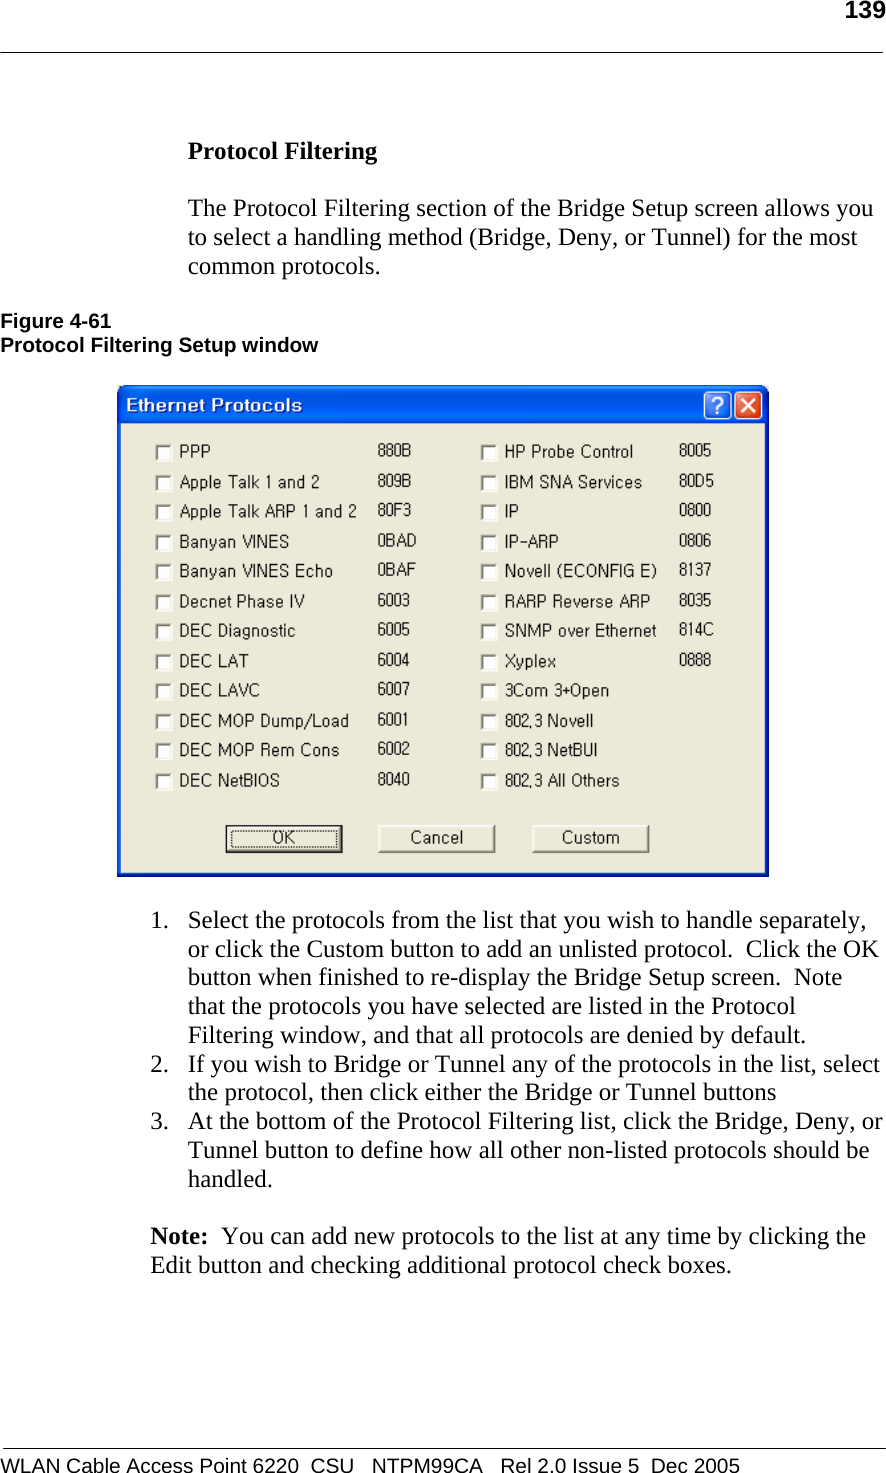   139  WLAN Cable Access Point 6220  CSU   NTPM99CA   Rel 2.0 Issue 5  Dec 2005  Protocol Filtering    The Protocol Filtering section of the Bridge Setup screen allows you to select a handling method (Bridge, Deny, or Tunnel) for the most common protocols.    Figure 4-61 Protocol Filtering Setup window    1. Select the protocols from the list that you wish to handle separately, or click the Custom button to add an unlisted protocol.  Click the OK button when finished to re-display the Bridge Setup screen.  Note that the protocols you have selected are listed in the Protocol Filtering window, and that all protocols are denied by default. 2. If you wish to Bridge or Tunnel any of the protocols in the list, select the protocol, then click either the Bridge or Tunnel buttons 3. At the bottom of the Protocol Filtering list, click the Bridge, Deny, or Tunnel button to define how all other non-listed protocols should be handled.  Note:  You can add new protocols to the list at any time by clicking the Edit button and checking additional protocol check boxes. 